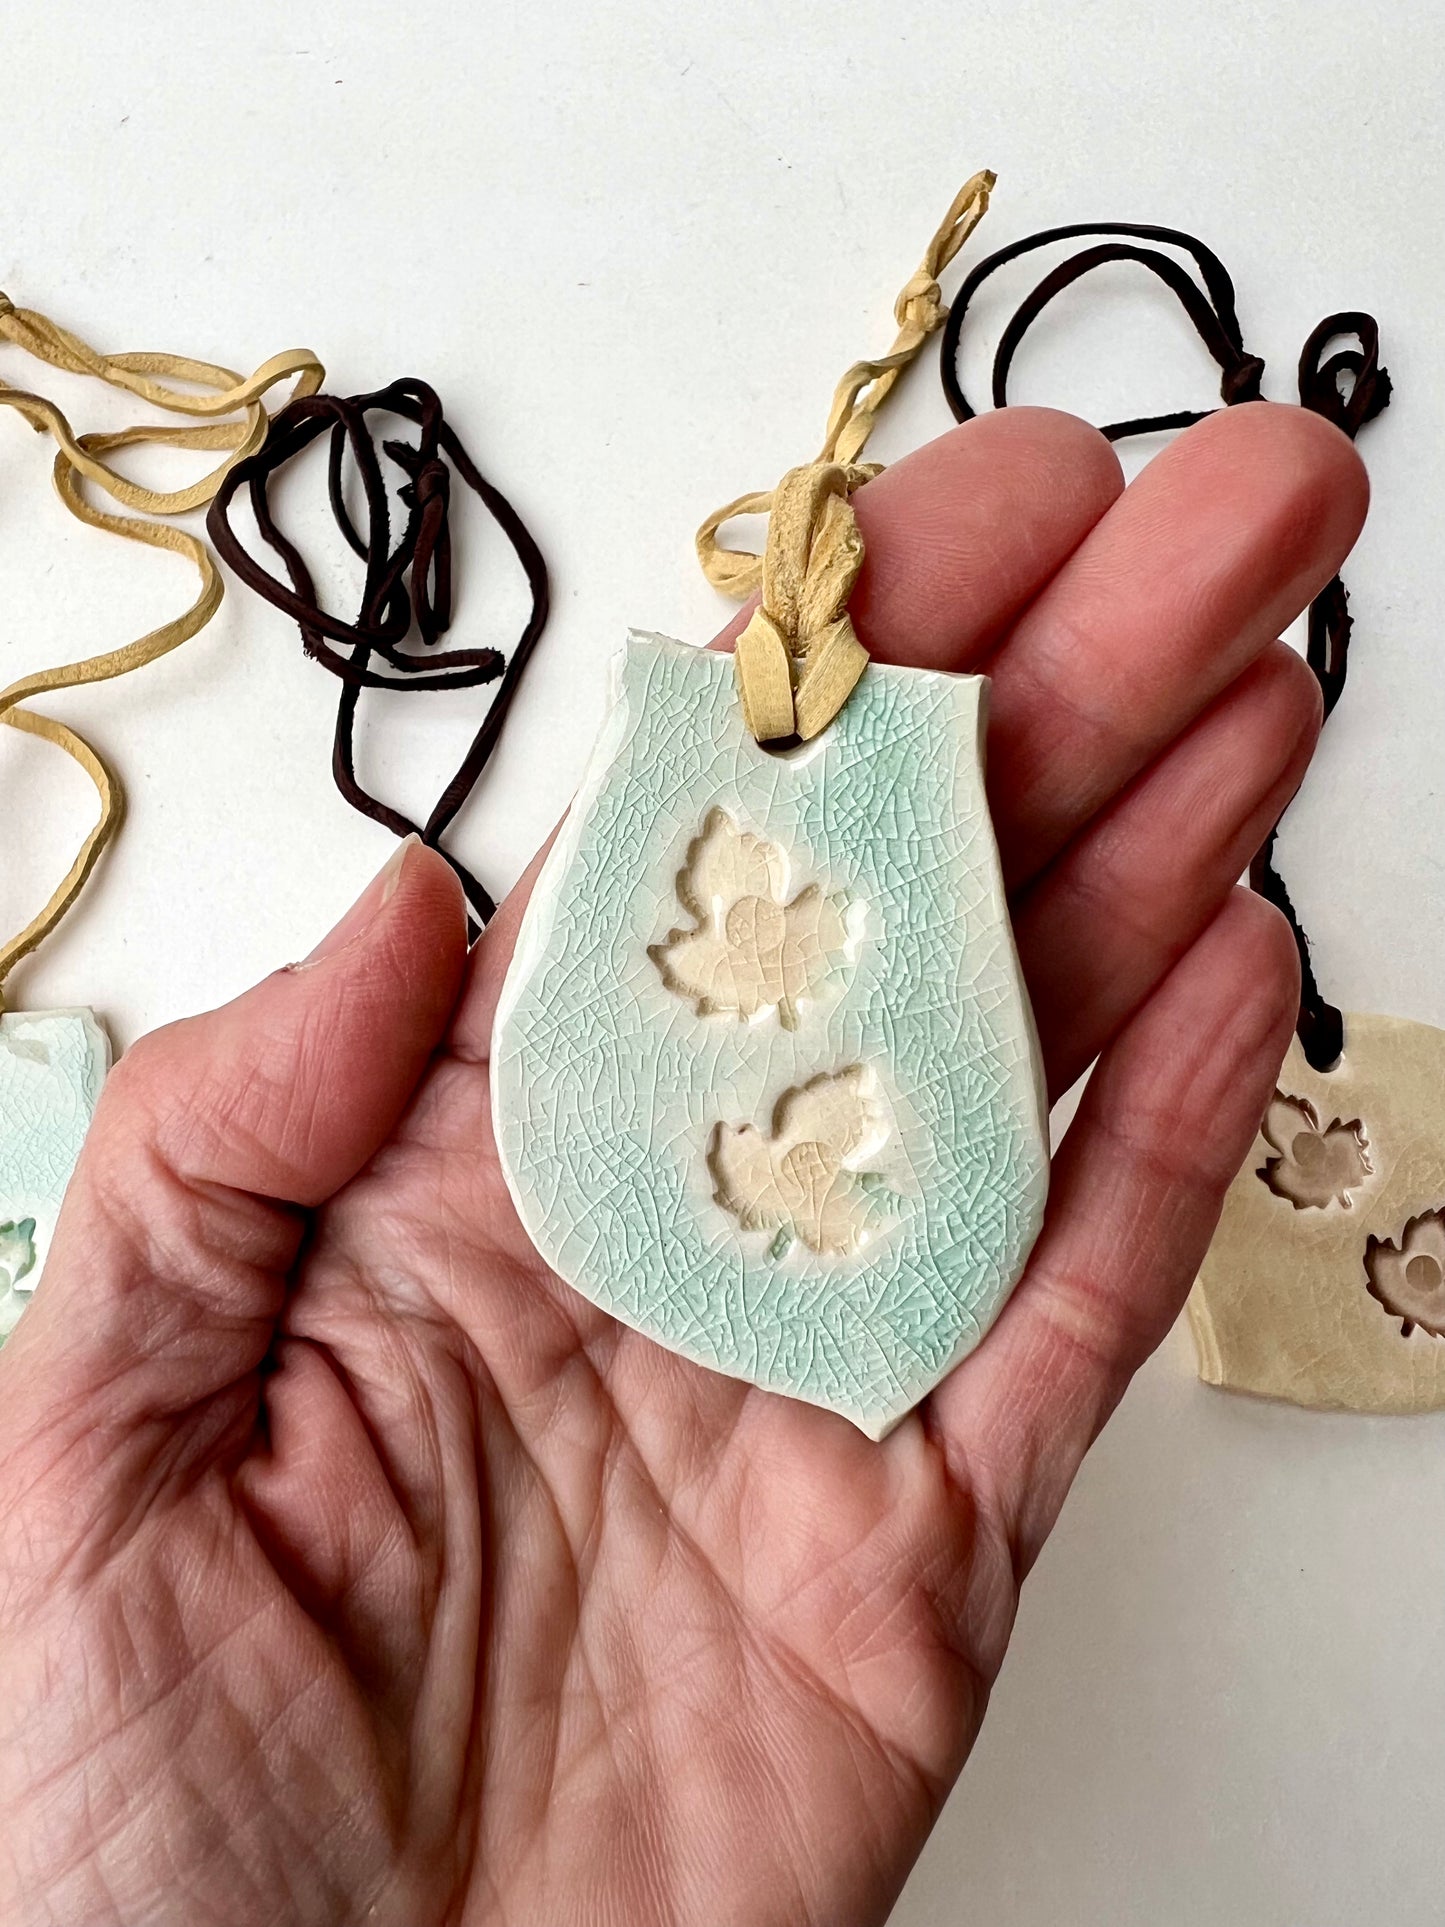 celadon crackle & parchment leaf jewelry on butter yellow leather samples/seconds/sale piece